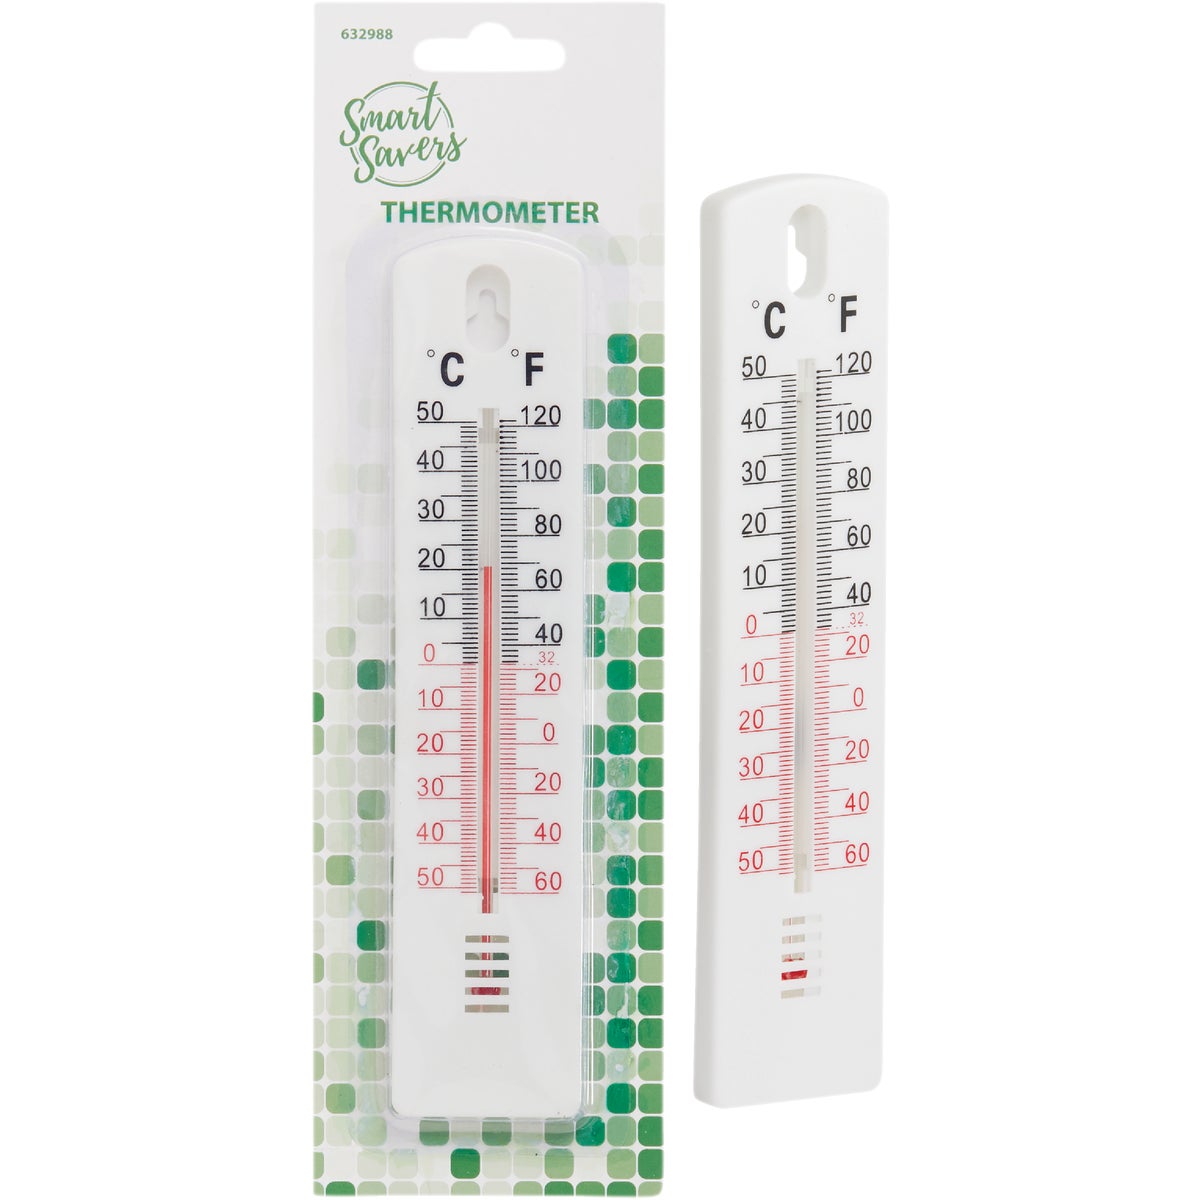 Smart Savers -20 to 120 F, -30 to 50 C White Window Thermometer